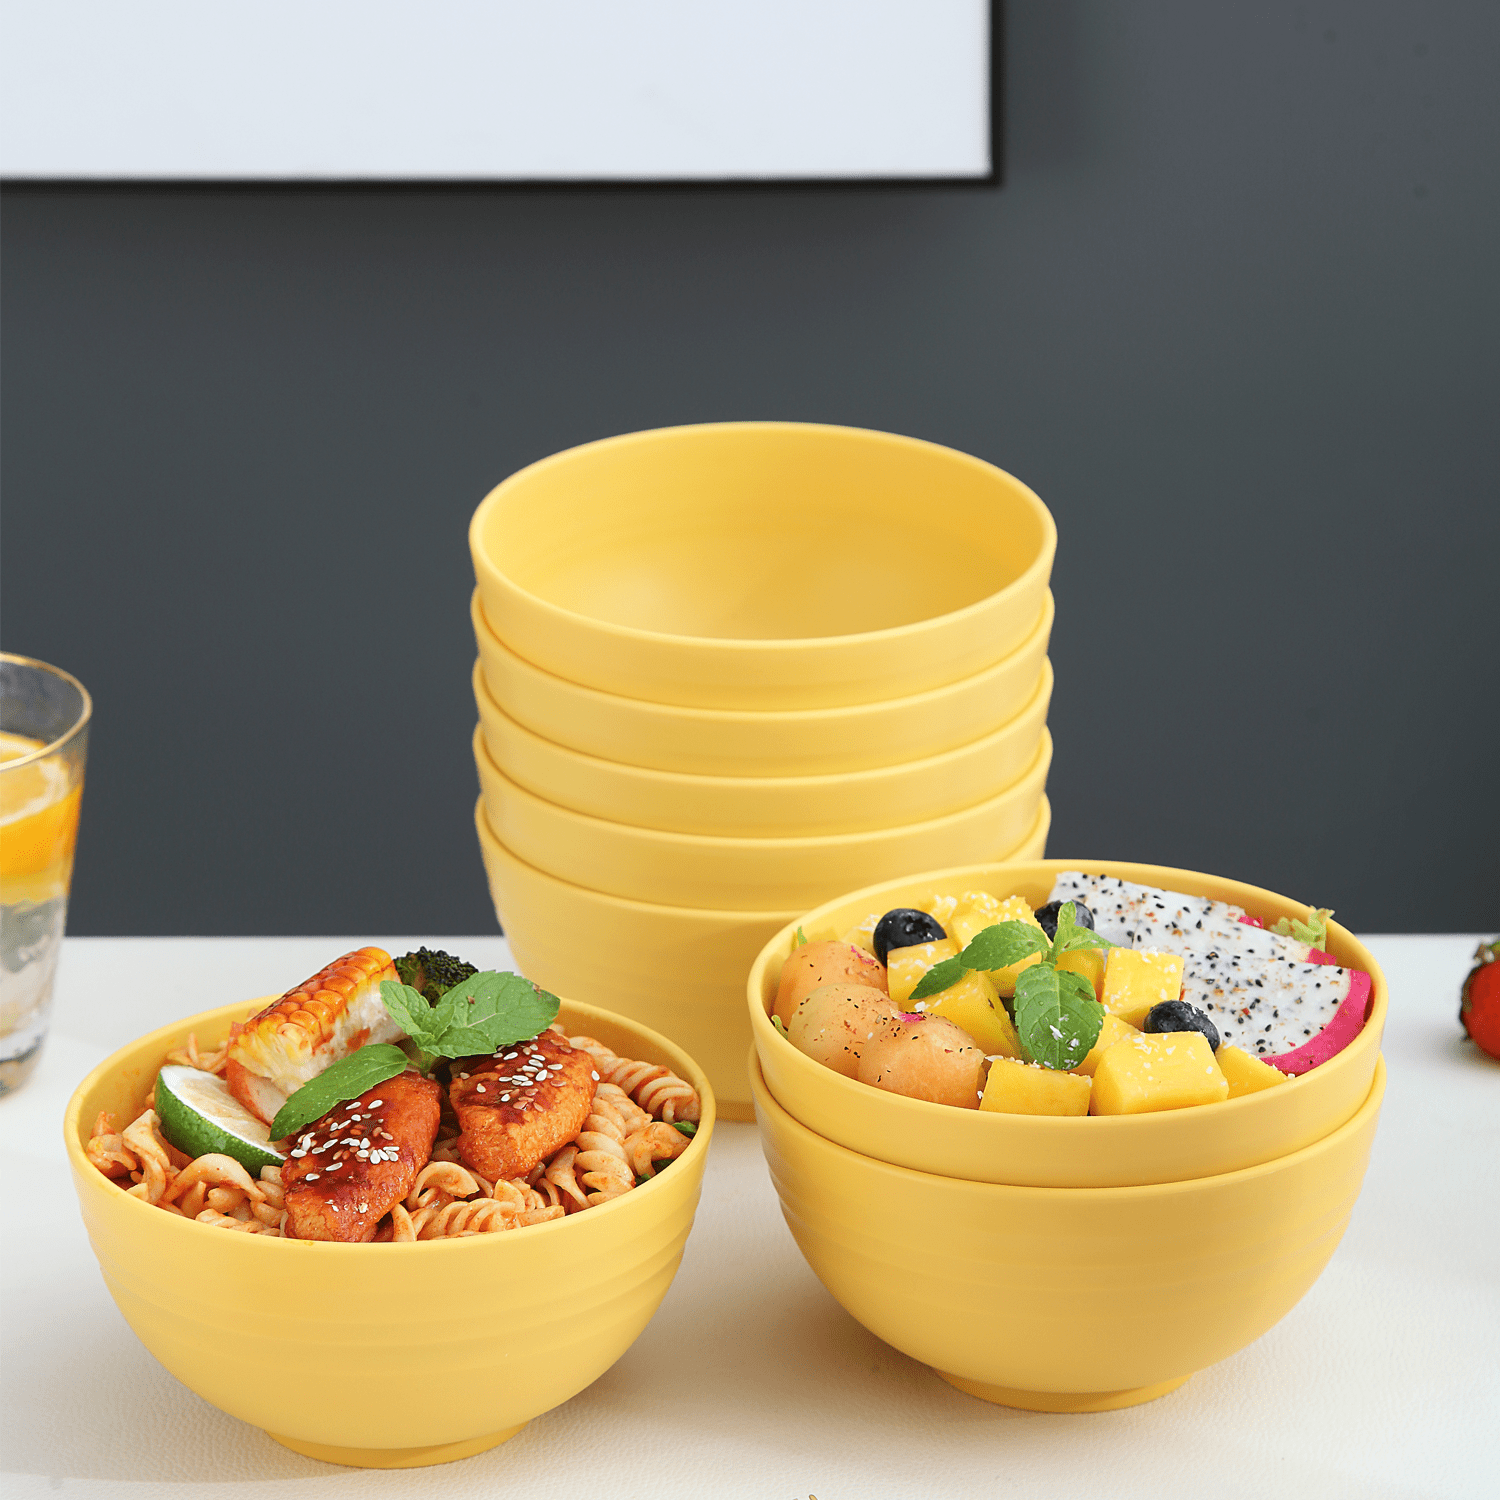 ReaNea Plastic Bowls Set of 8, 2 Sizes 17/34 oz Unbreakable and Reusable  Light Weight Bowl for Cereal, Soup, Pasta, Ramen, BPA Free (Orange) 